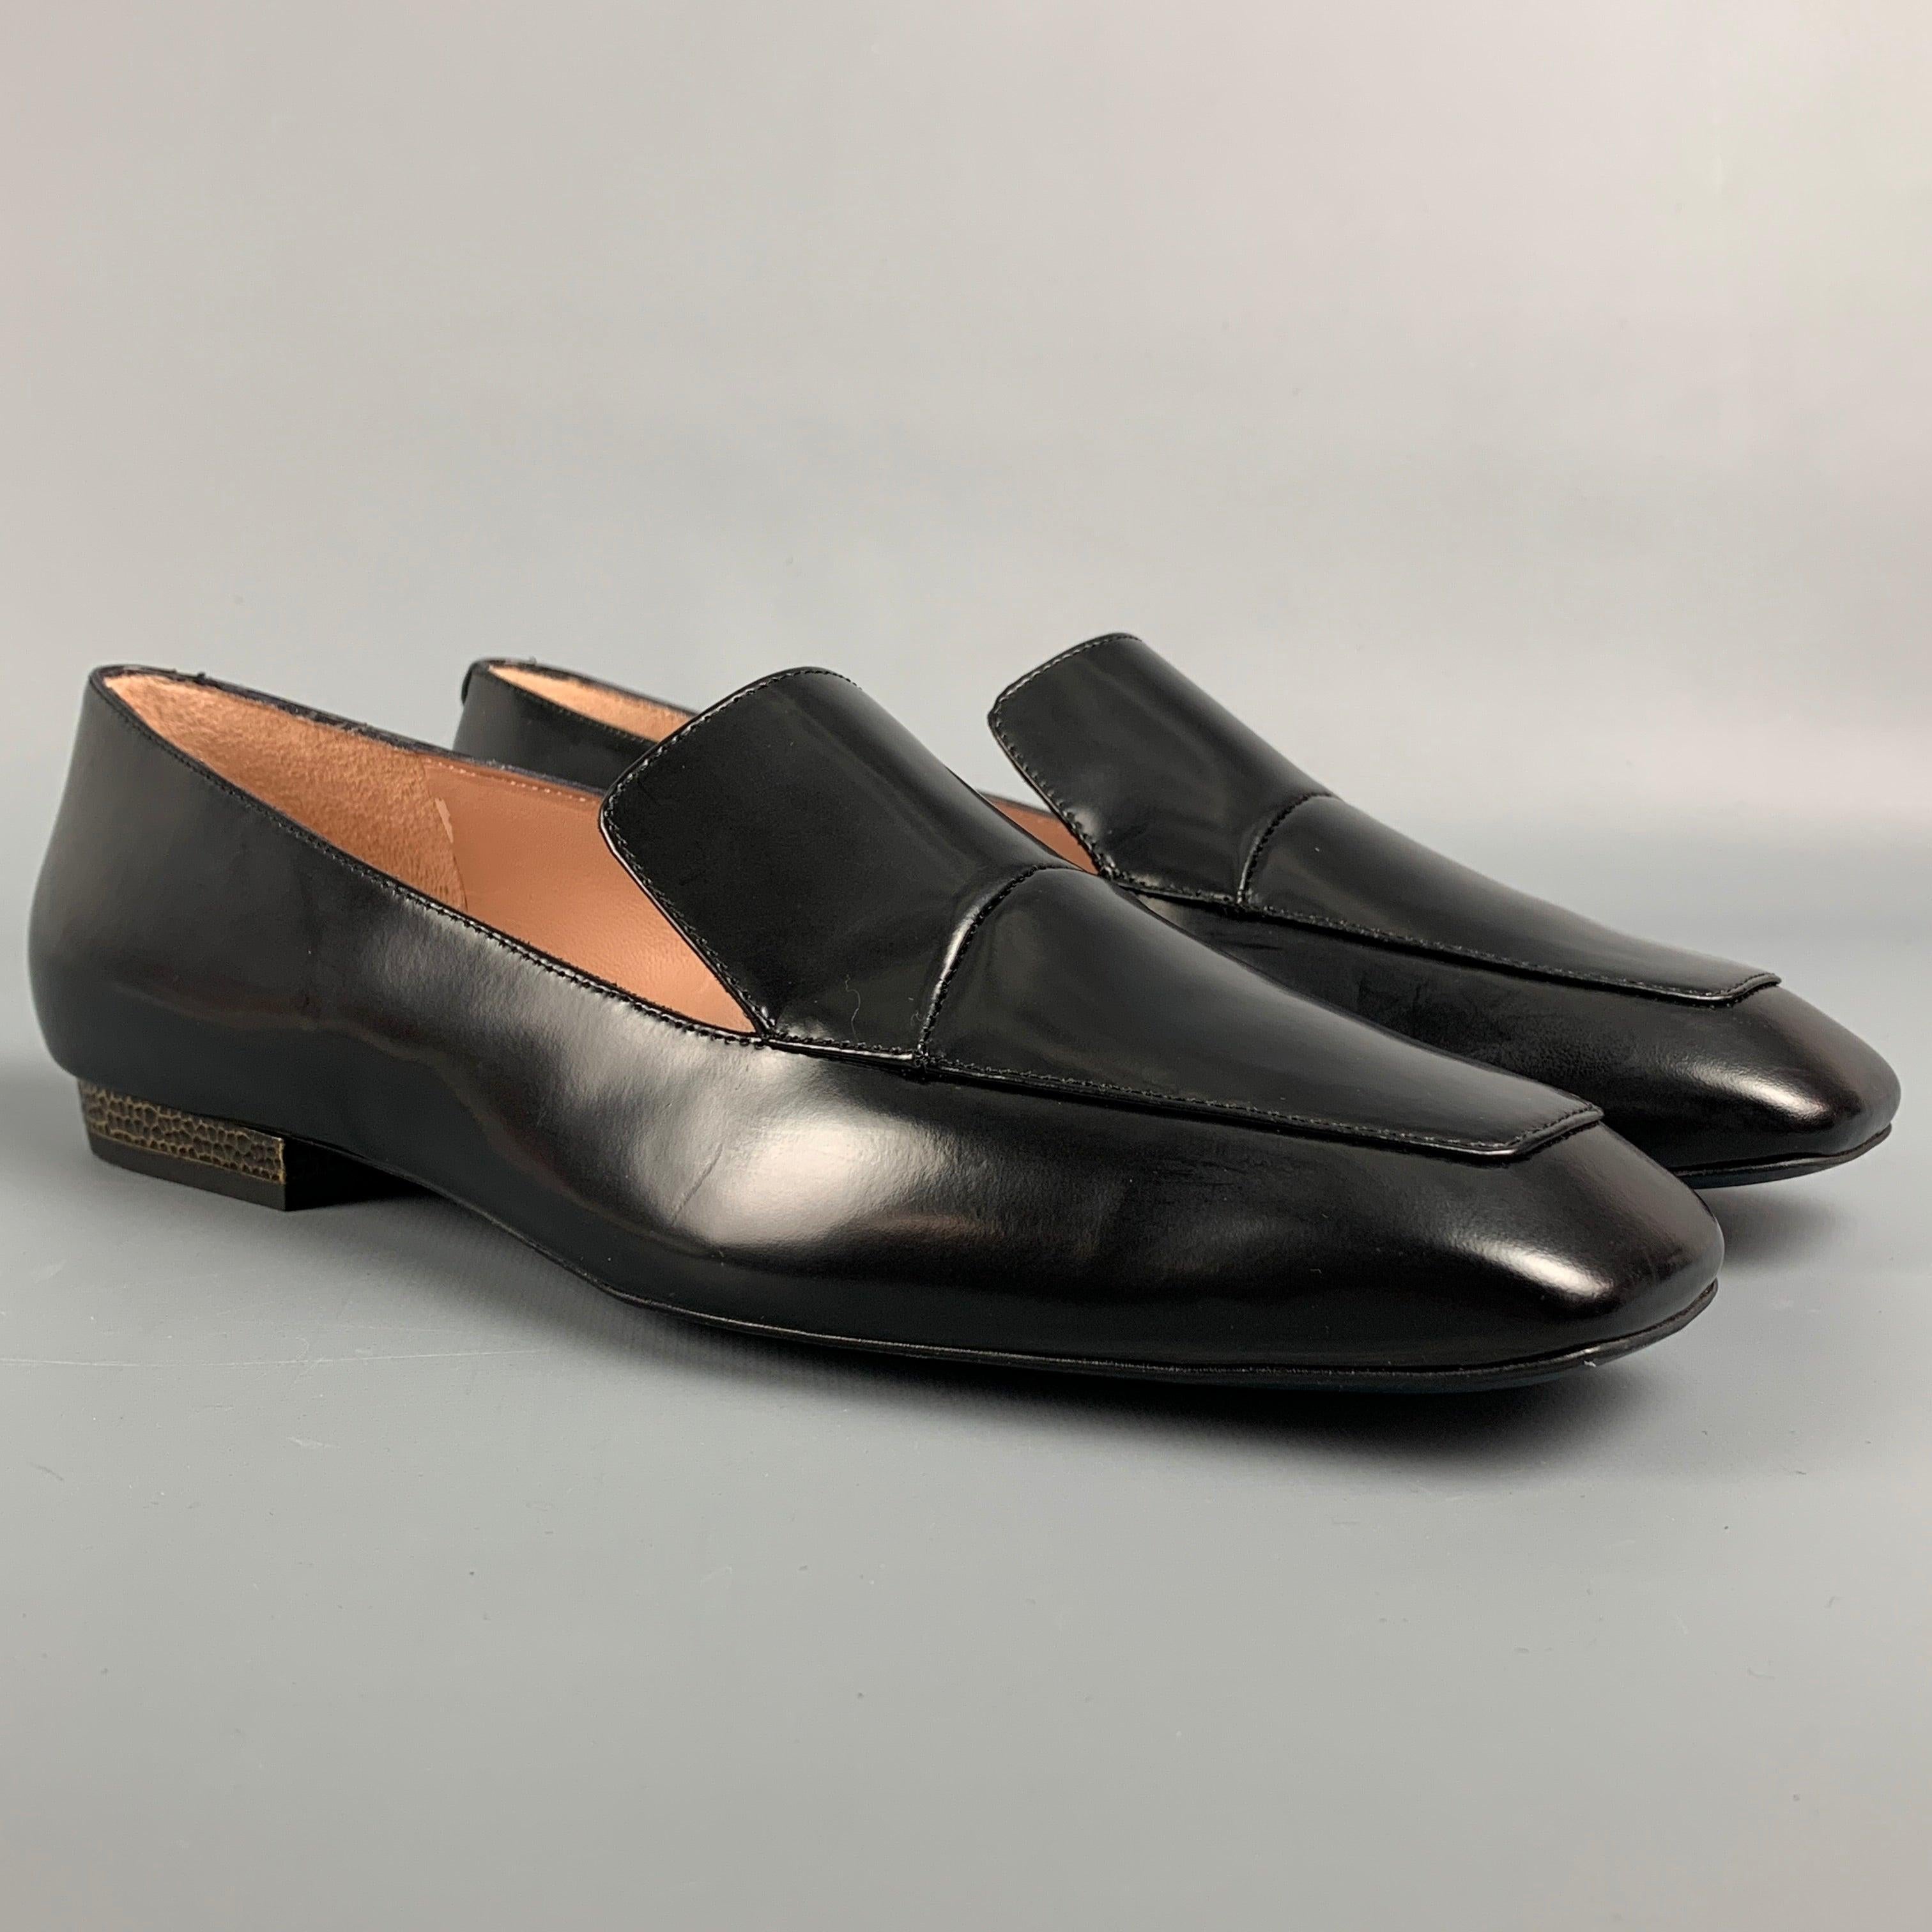 JIL SANDER Navy flats comes in a black leather featuring a slip on style and a square toe. Made in Italy.
New With Box.
 

Marked:   38.5Outsole: 10 inches  x 3 inches 
  
  
 
Reference: 111430
Category: Flats
More Details
    
Brand:  JIL